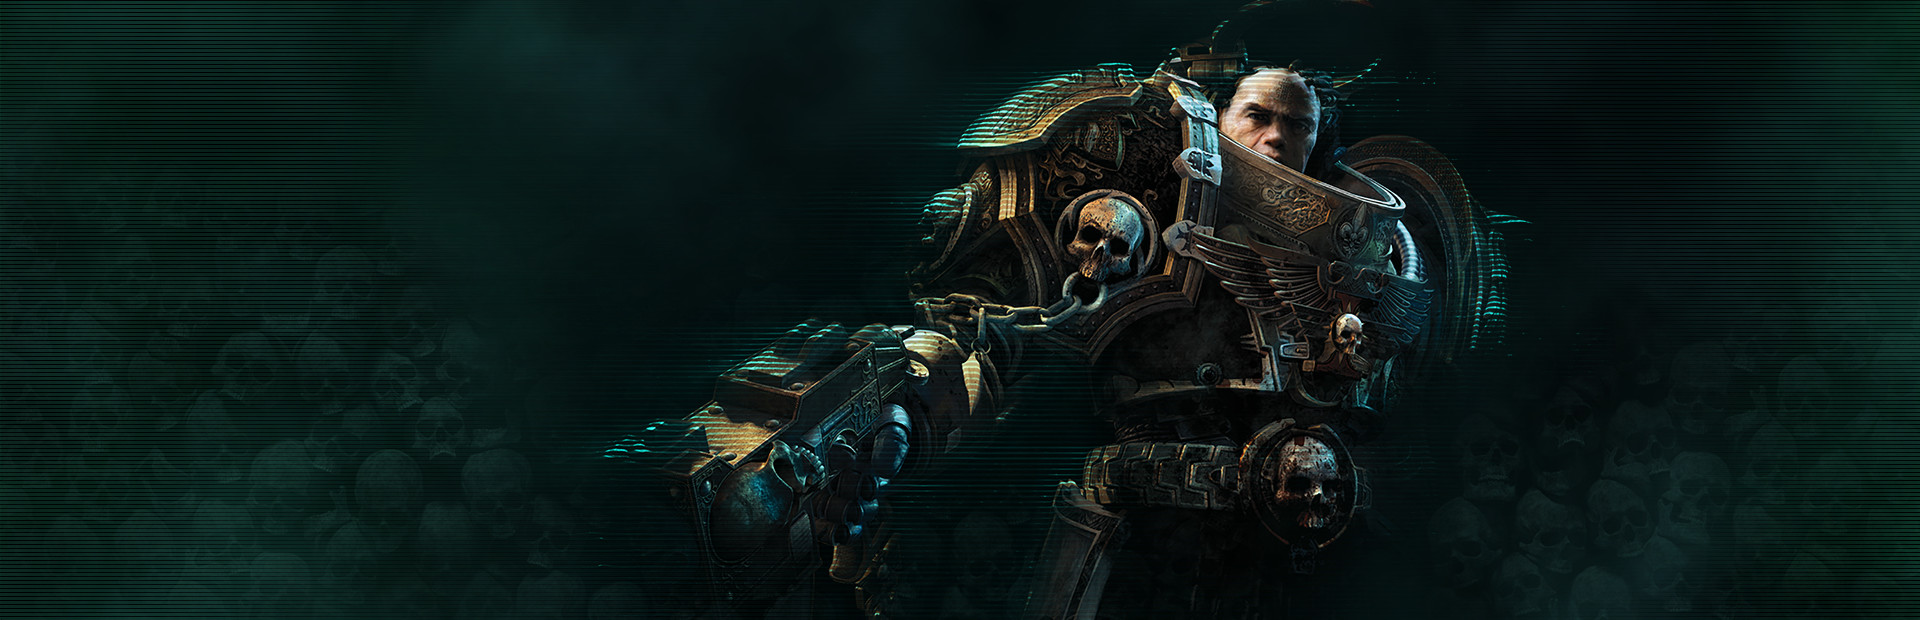 Warhammer 40,000: Inquisitor - Martyr cover image